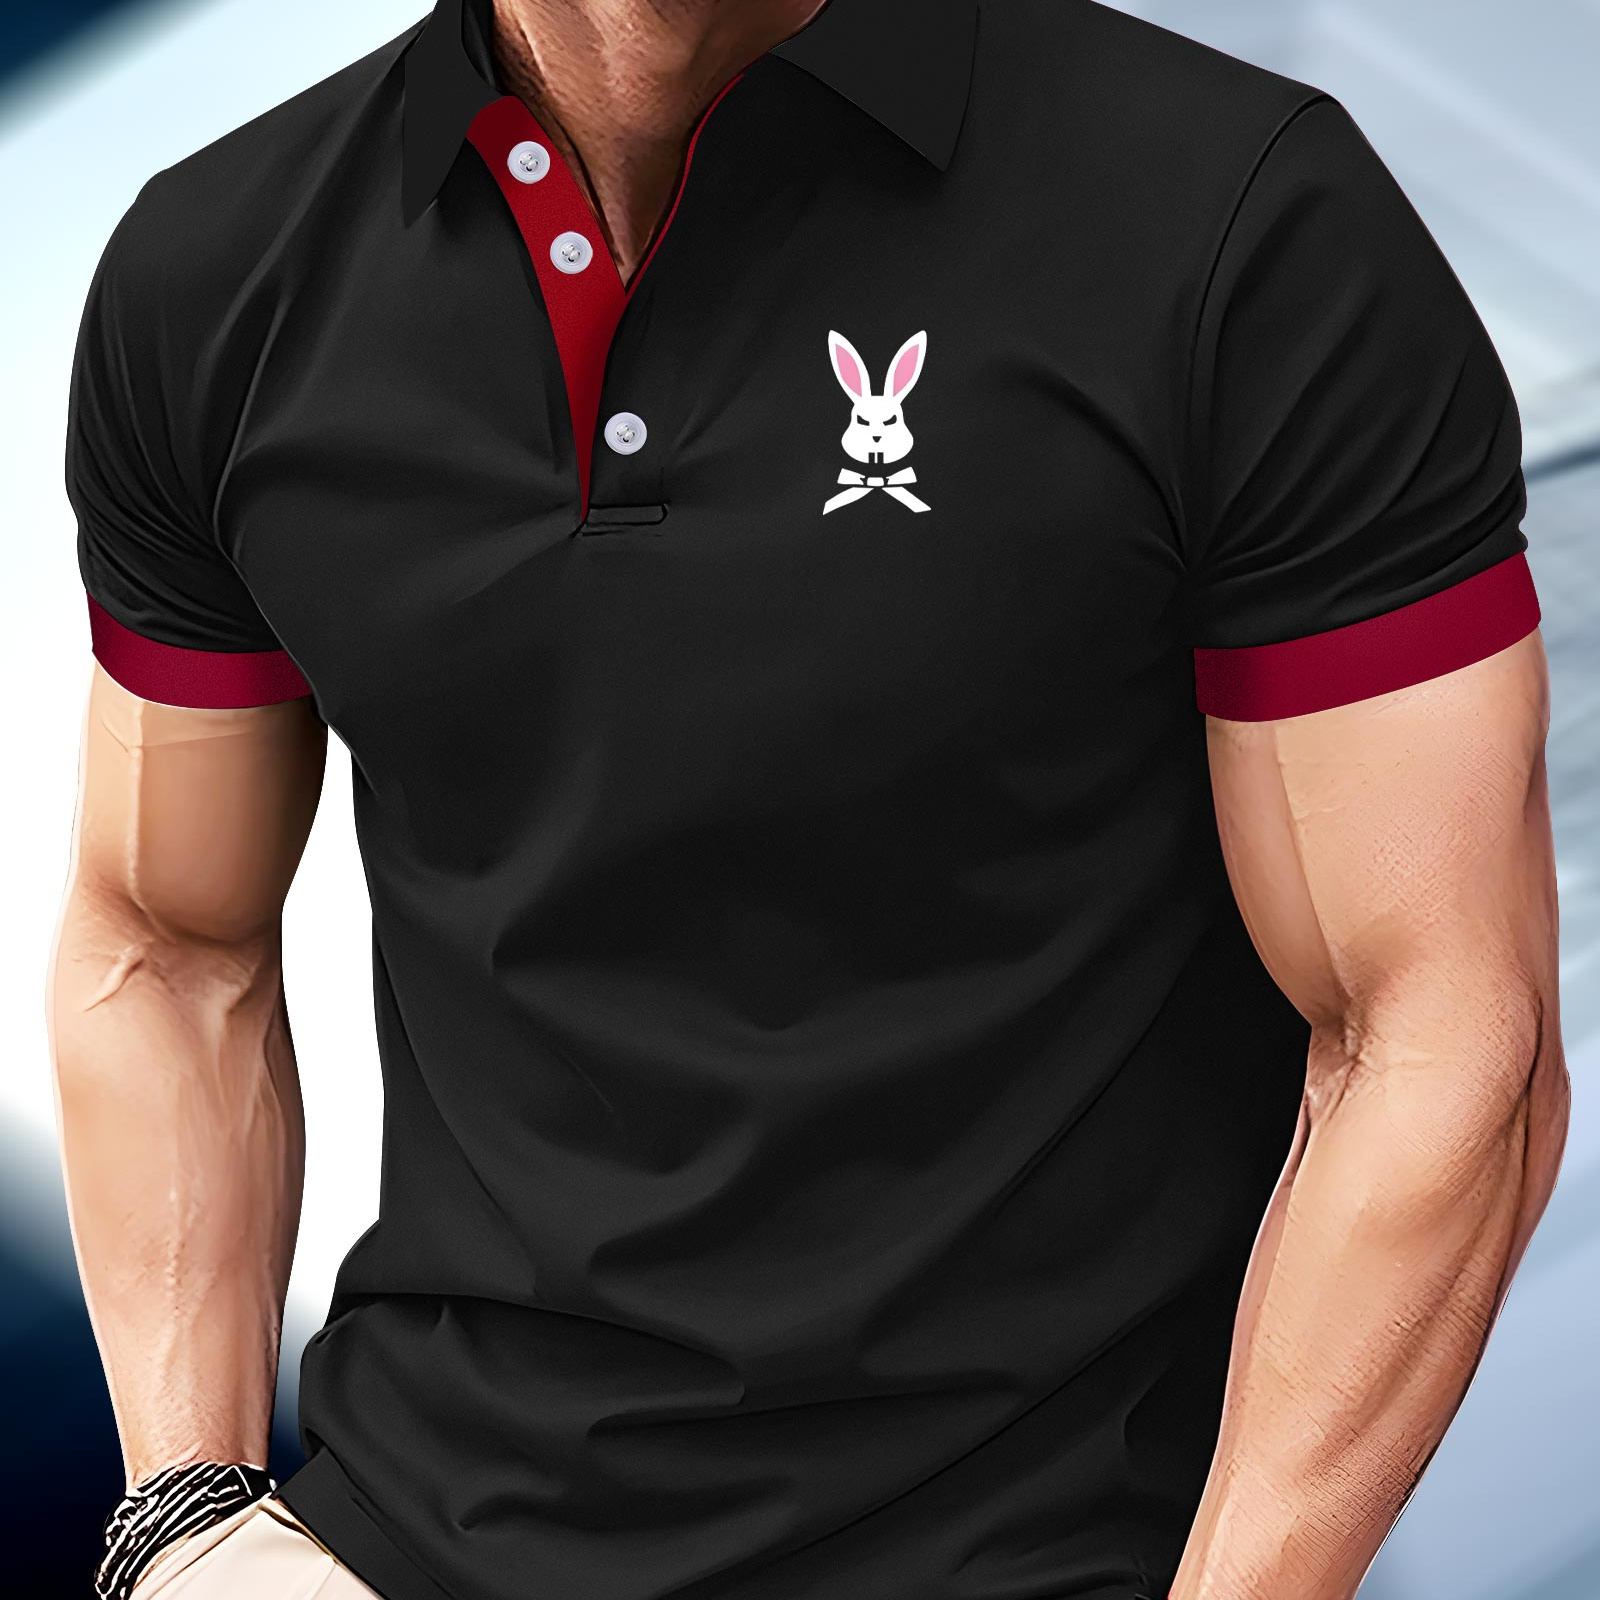 

Rabbit Print Men's Trendy Henley T-shirt, Fashion Short Sleeve Casual Golf Tee, Comfy Breathable Lapel Business Top For Spring Summer Tennis Outdoor Activities Holiday As Gifts